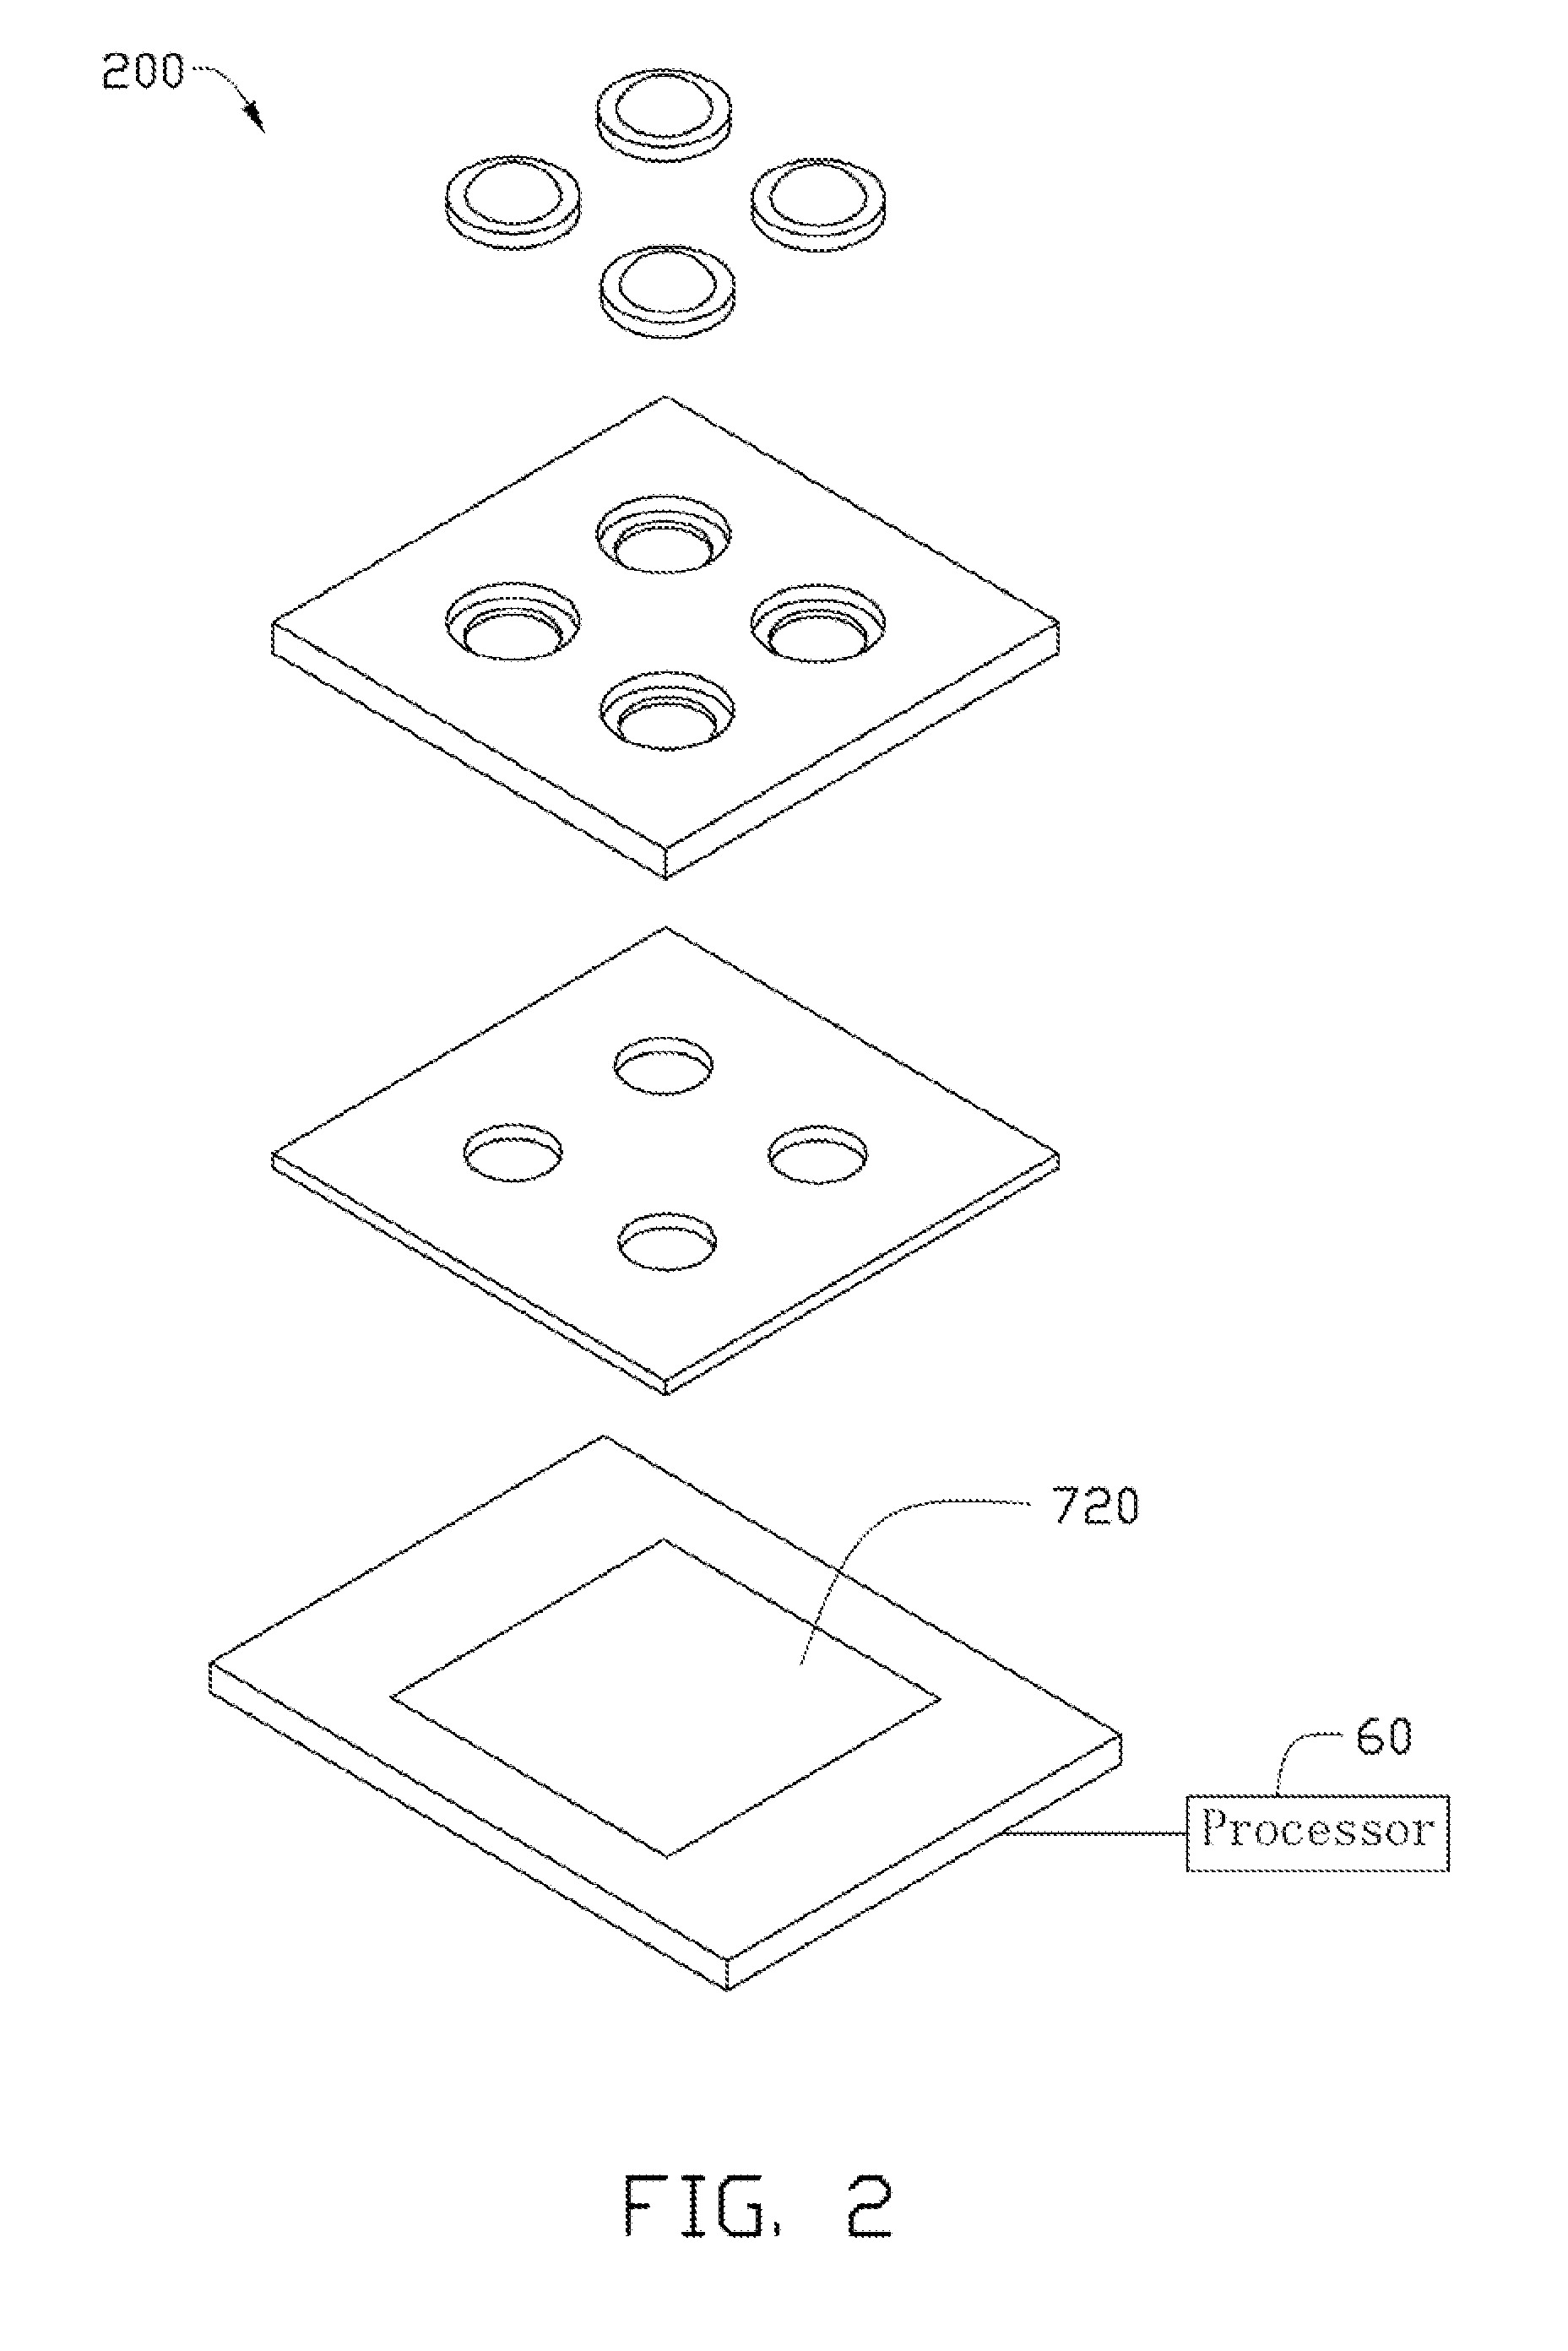 Camera module with lens array